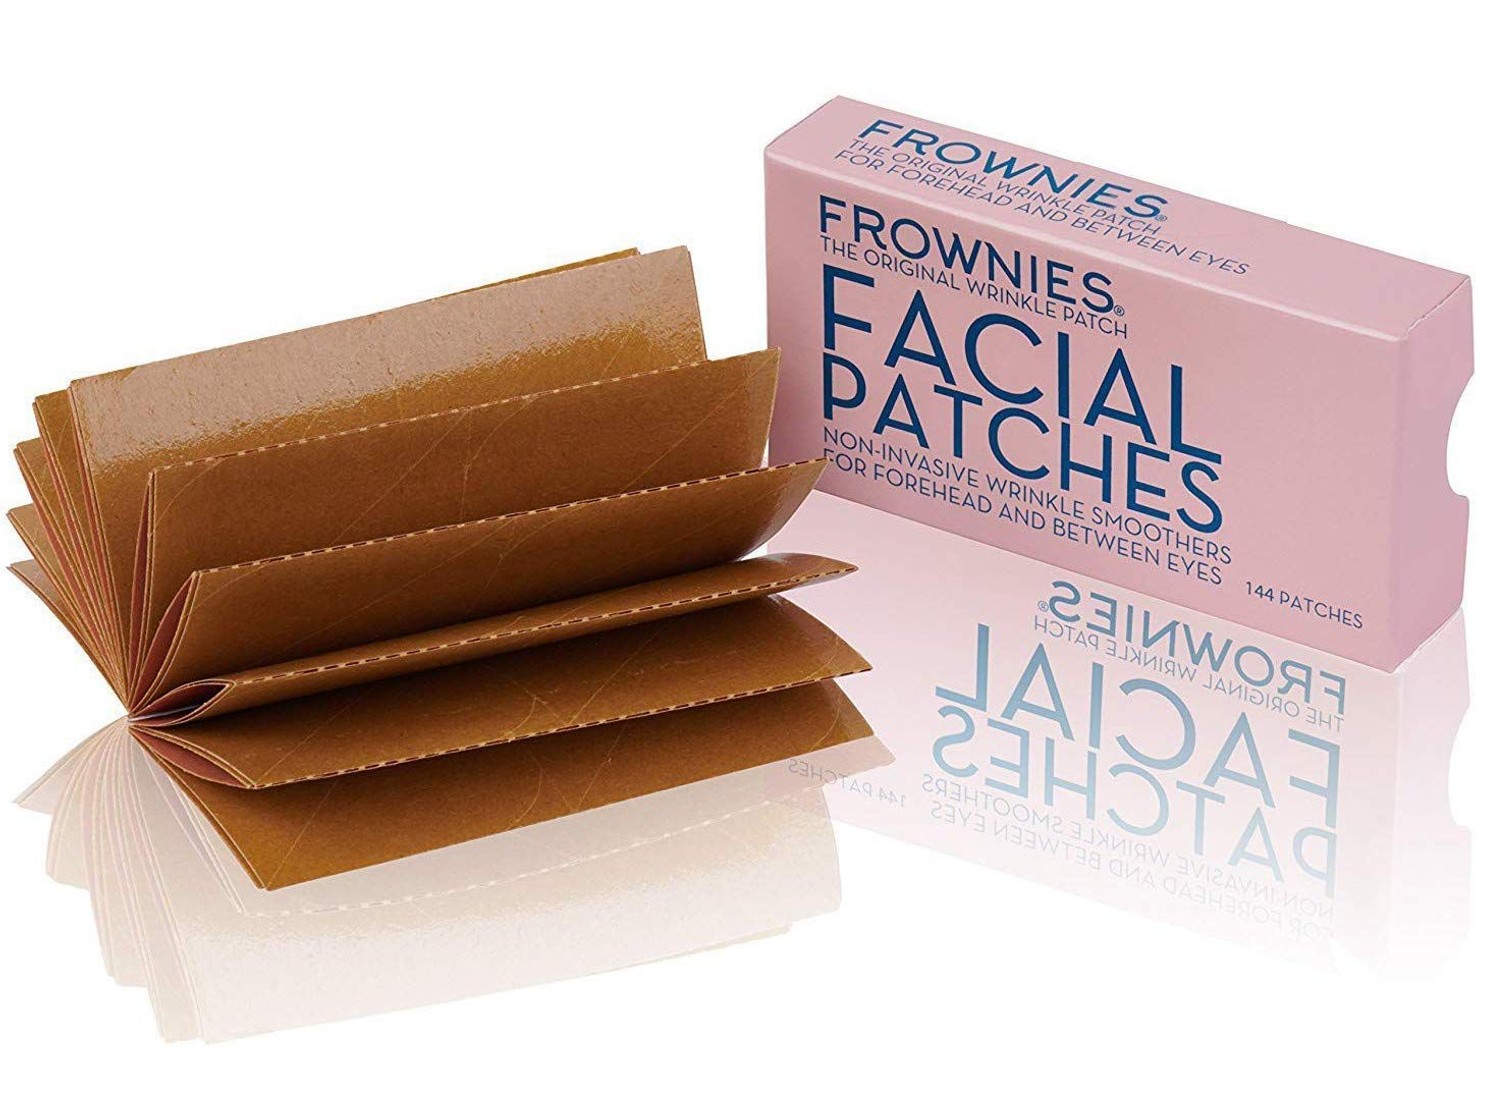 A fanned-out stack of brown Frownies facial patches and their pink storage box on a white background.